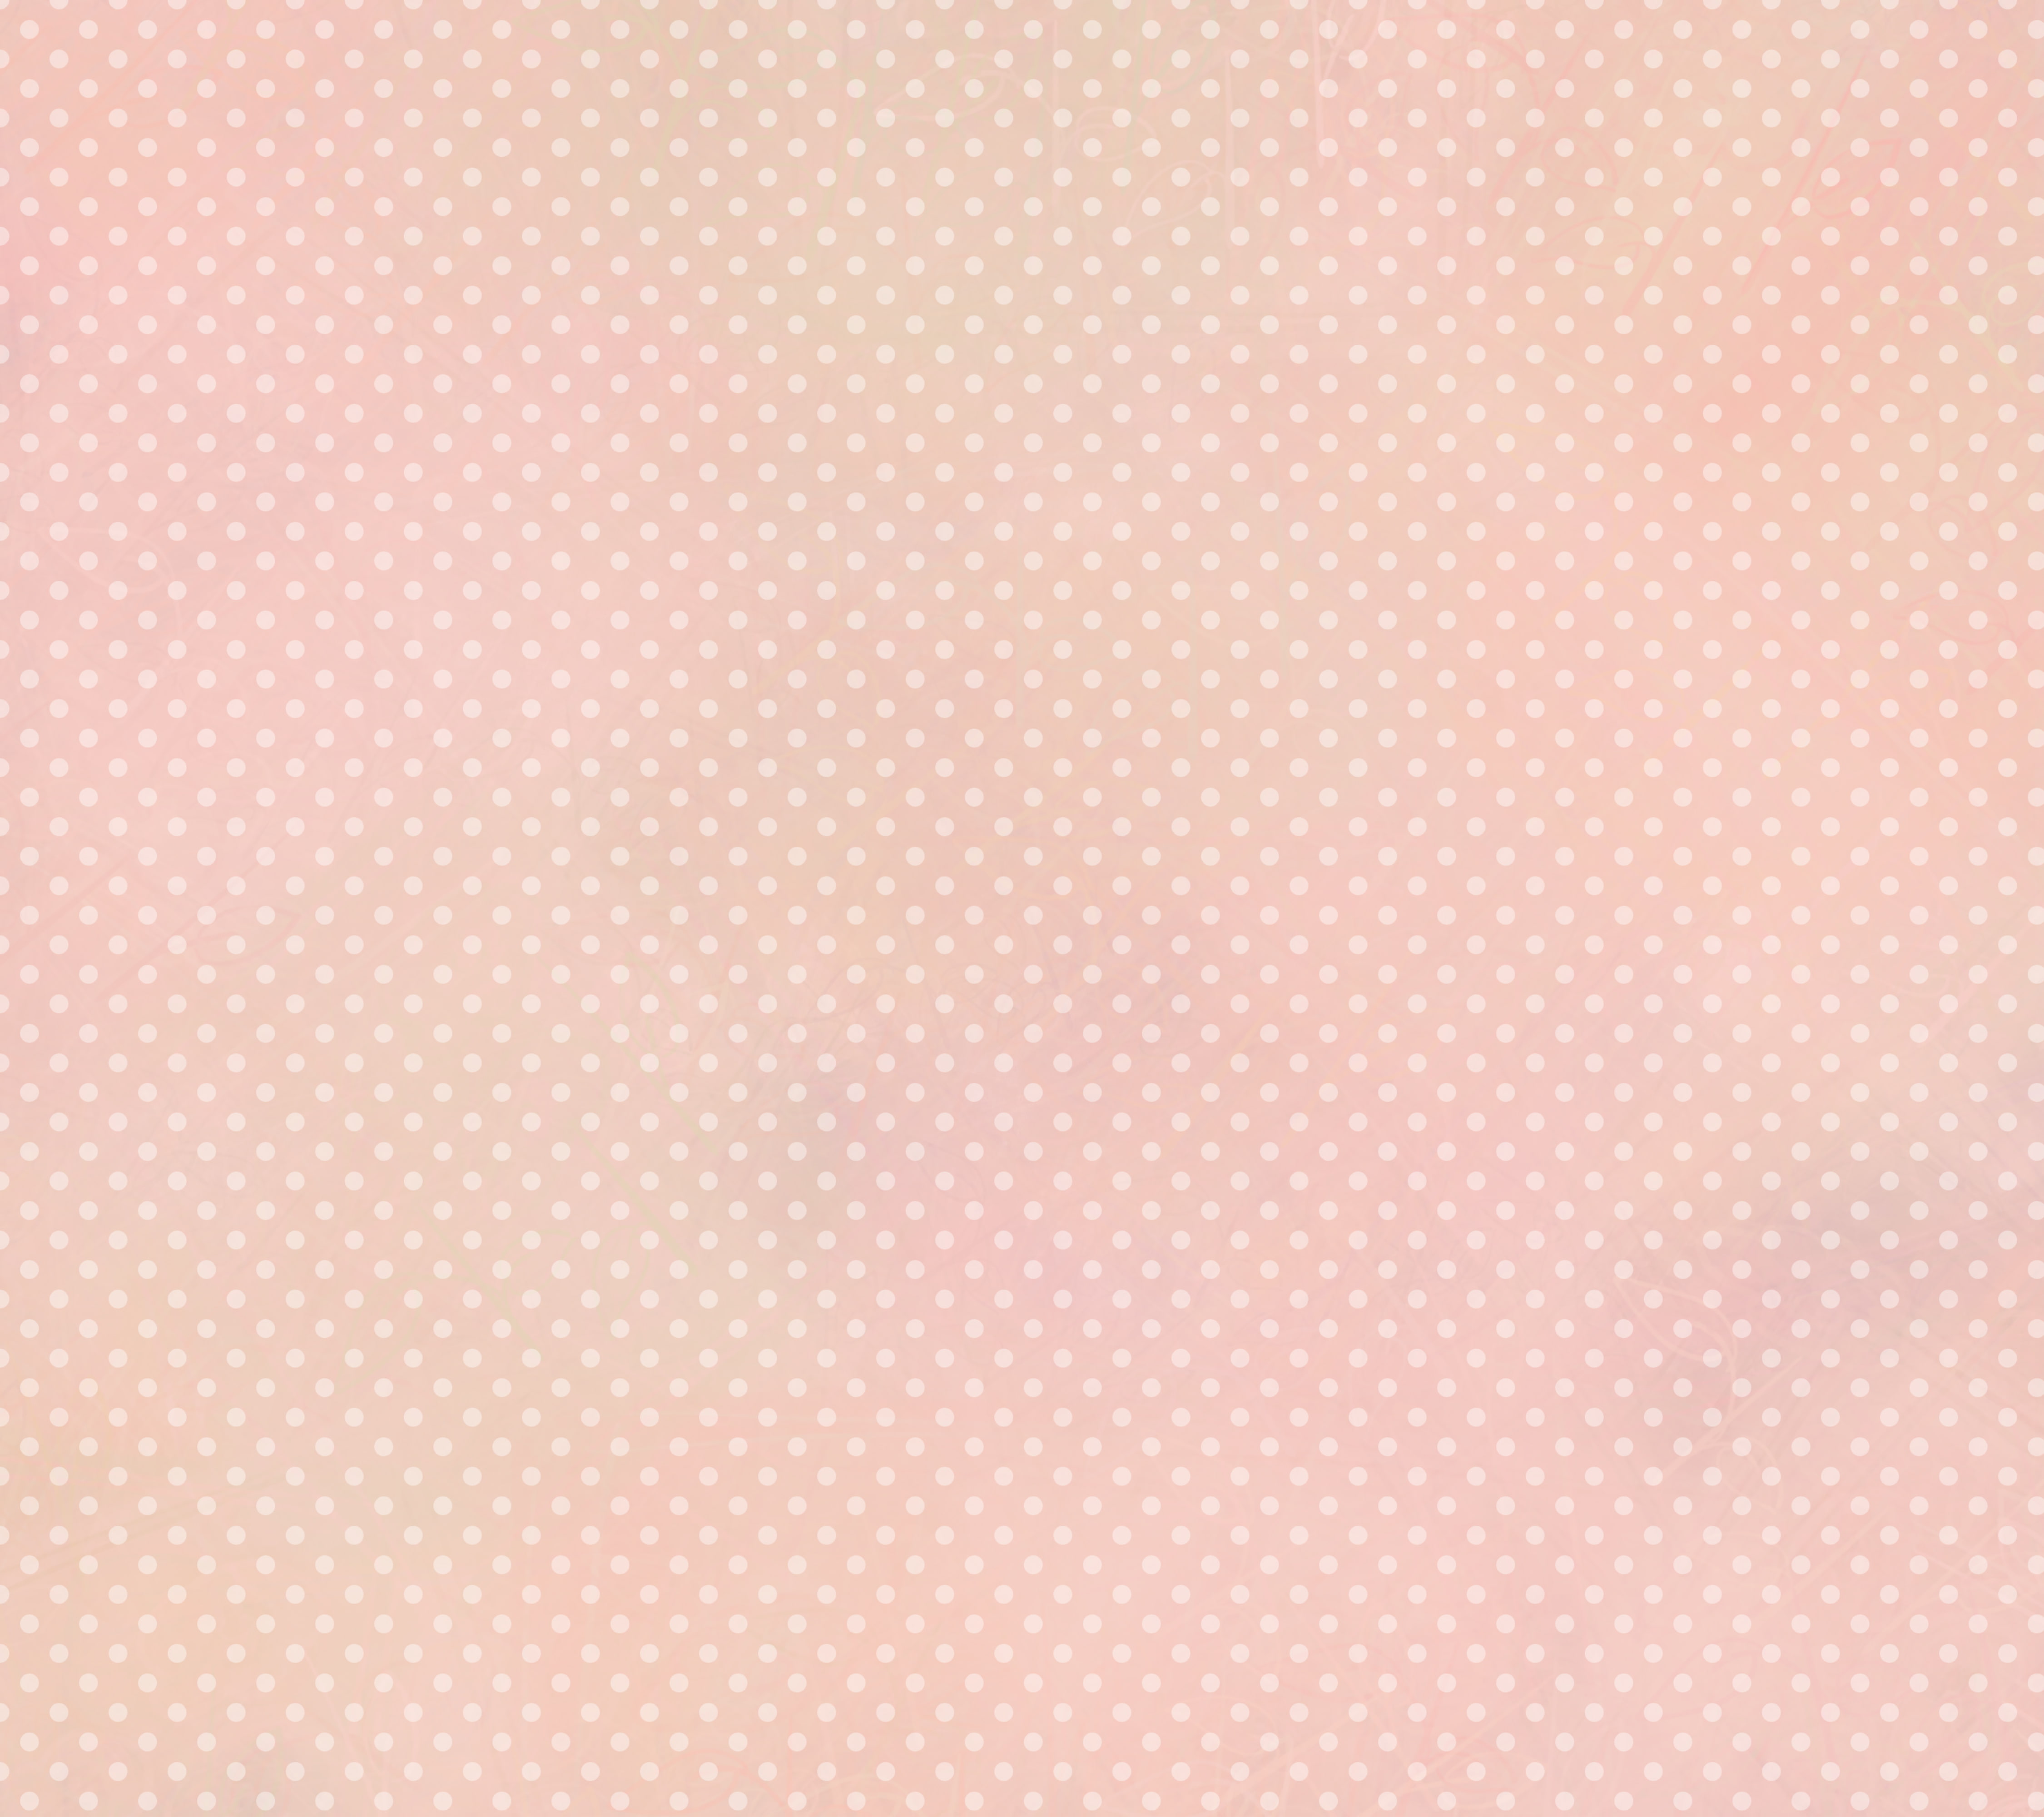 pink and white polka dots wallpaper, background, color, texture